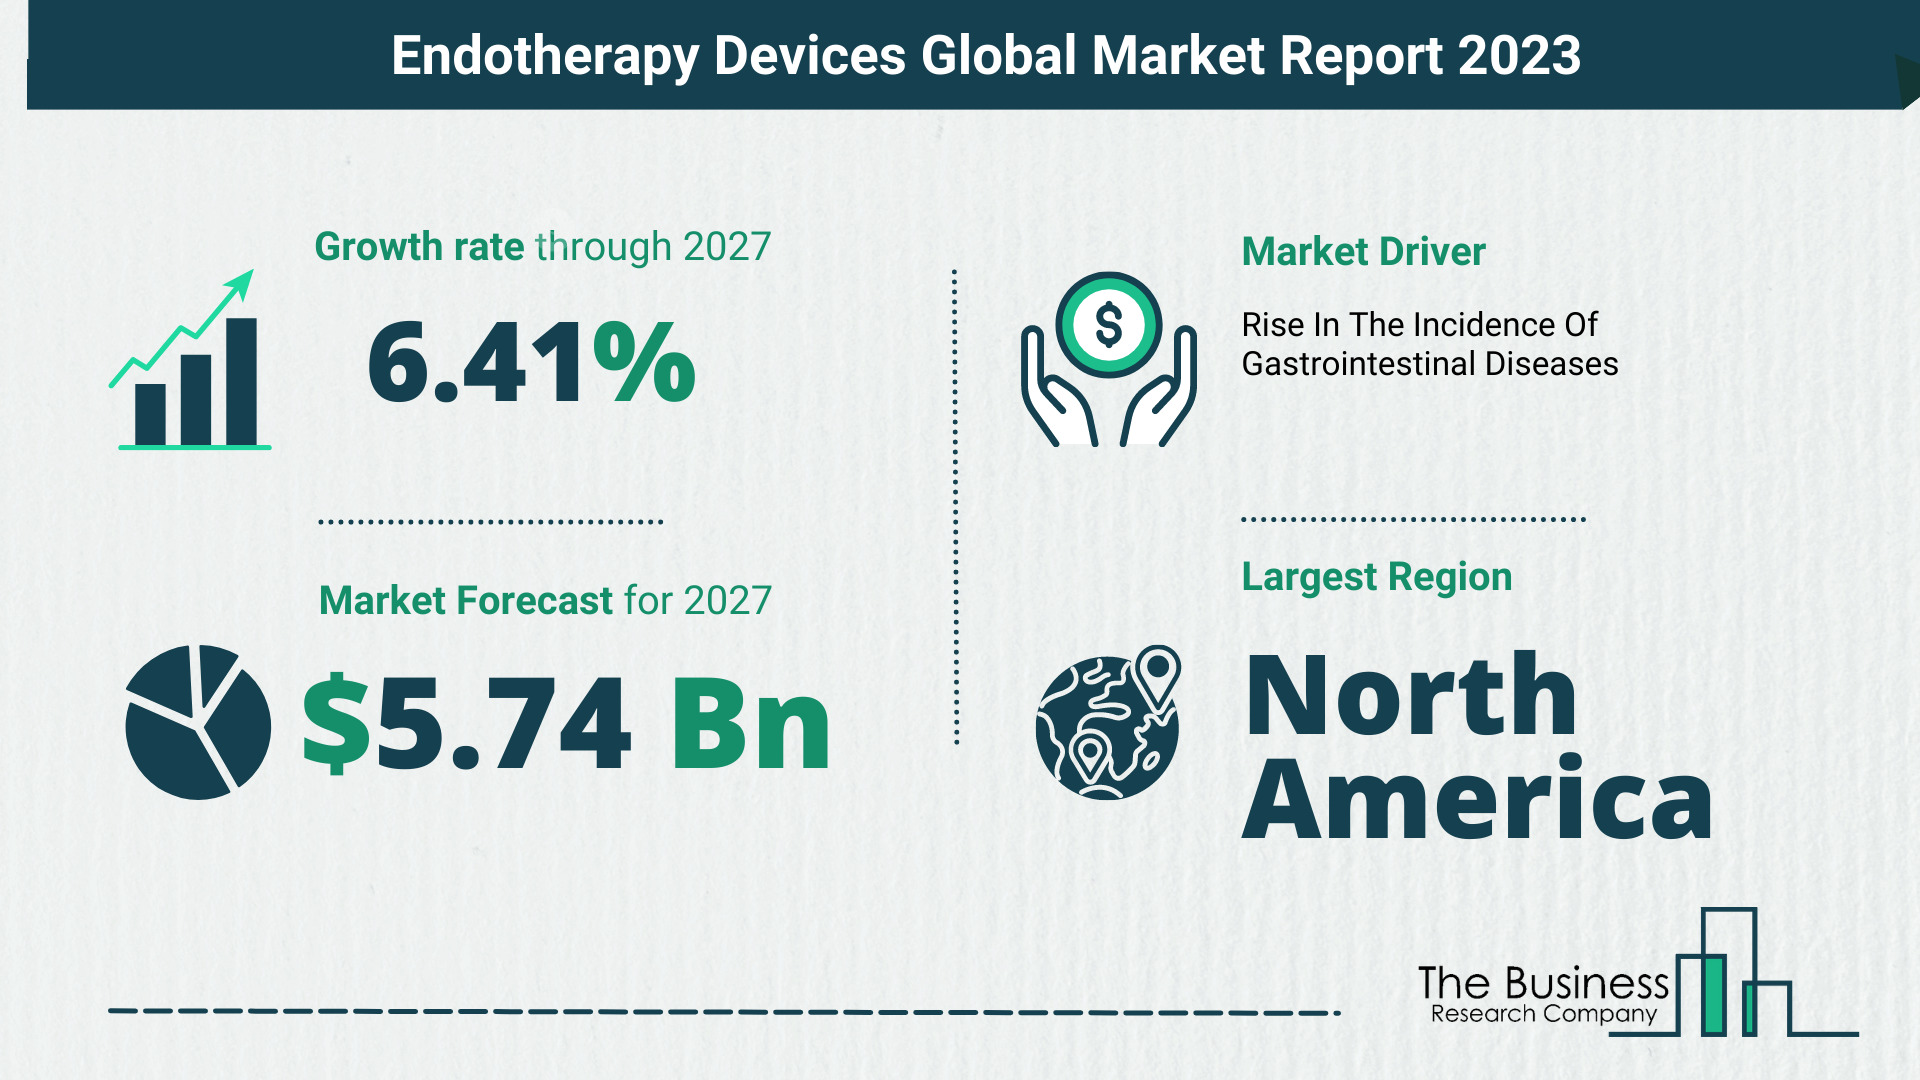 What Will The Endotherapy Devices Market Look Like In 2023?